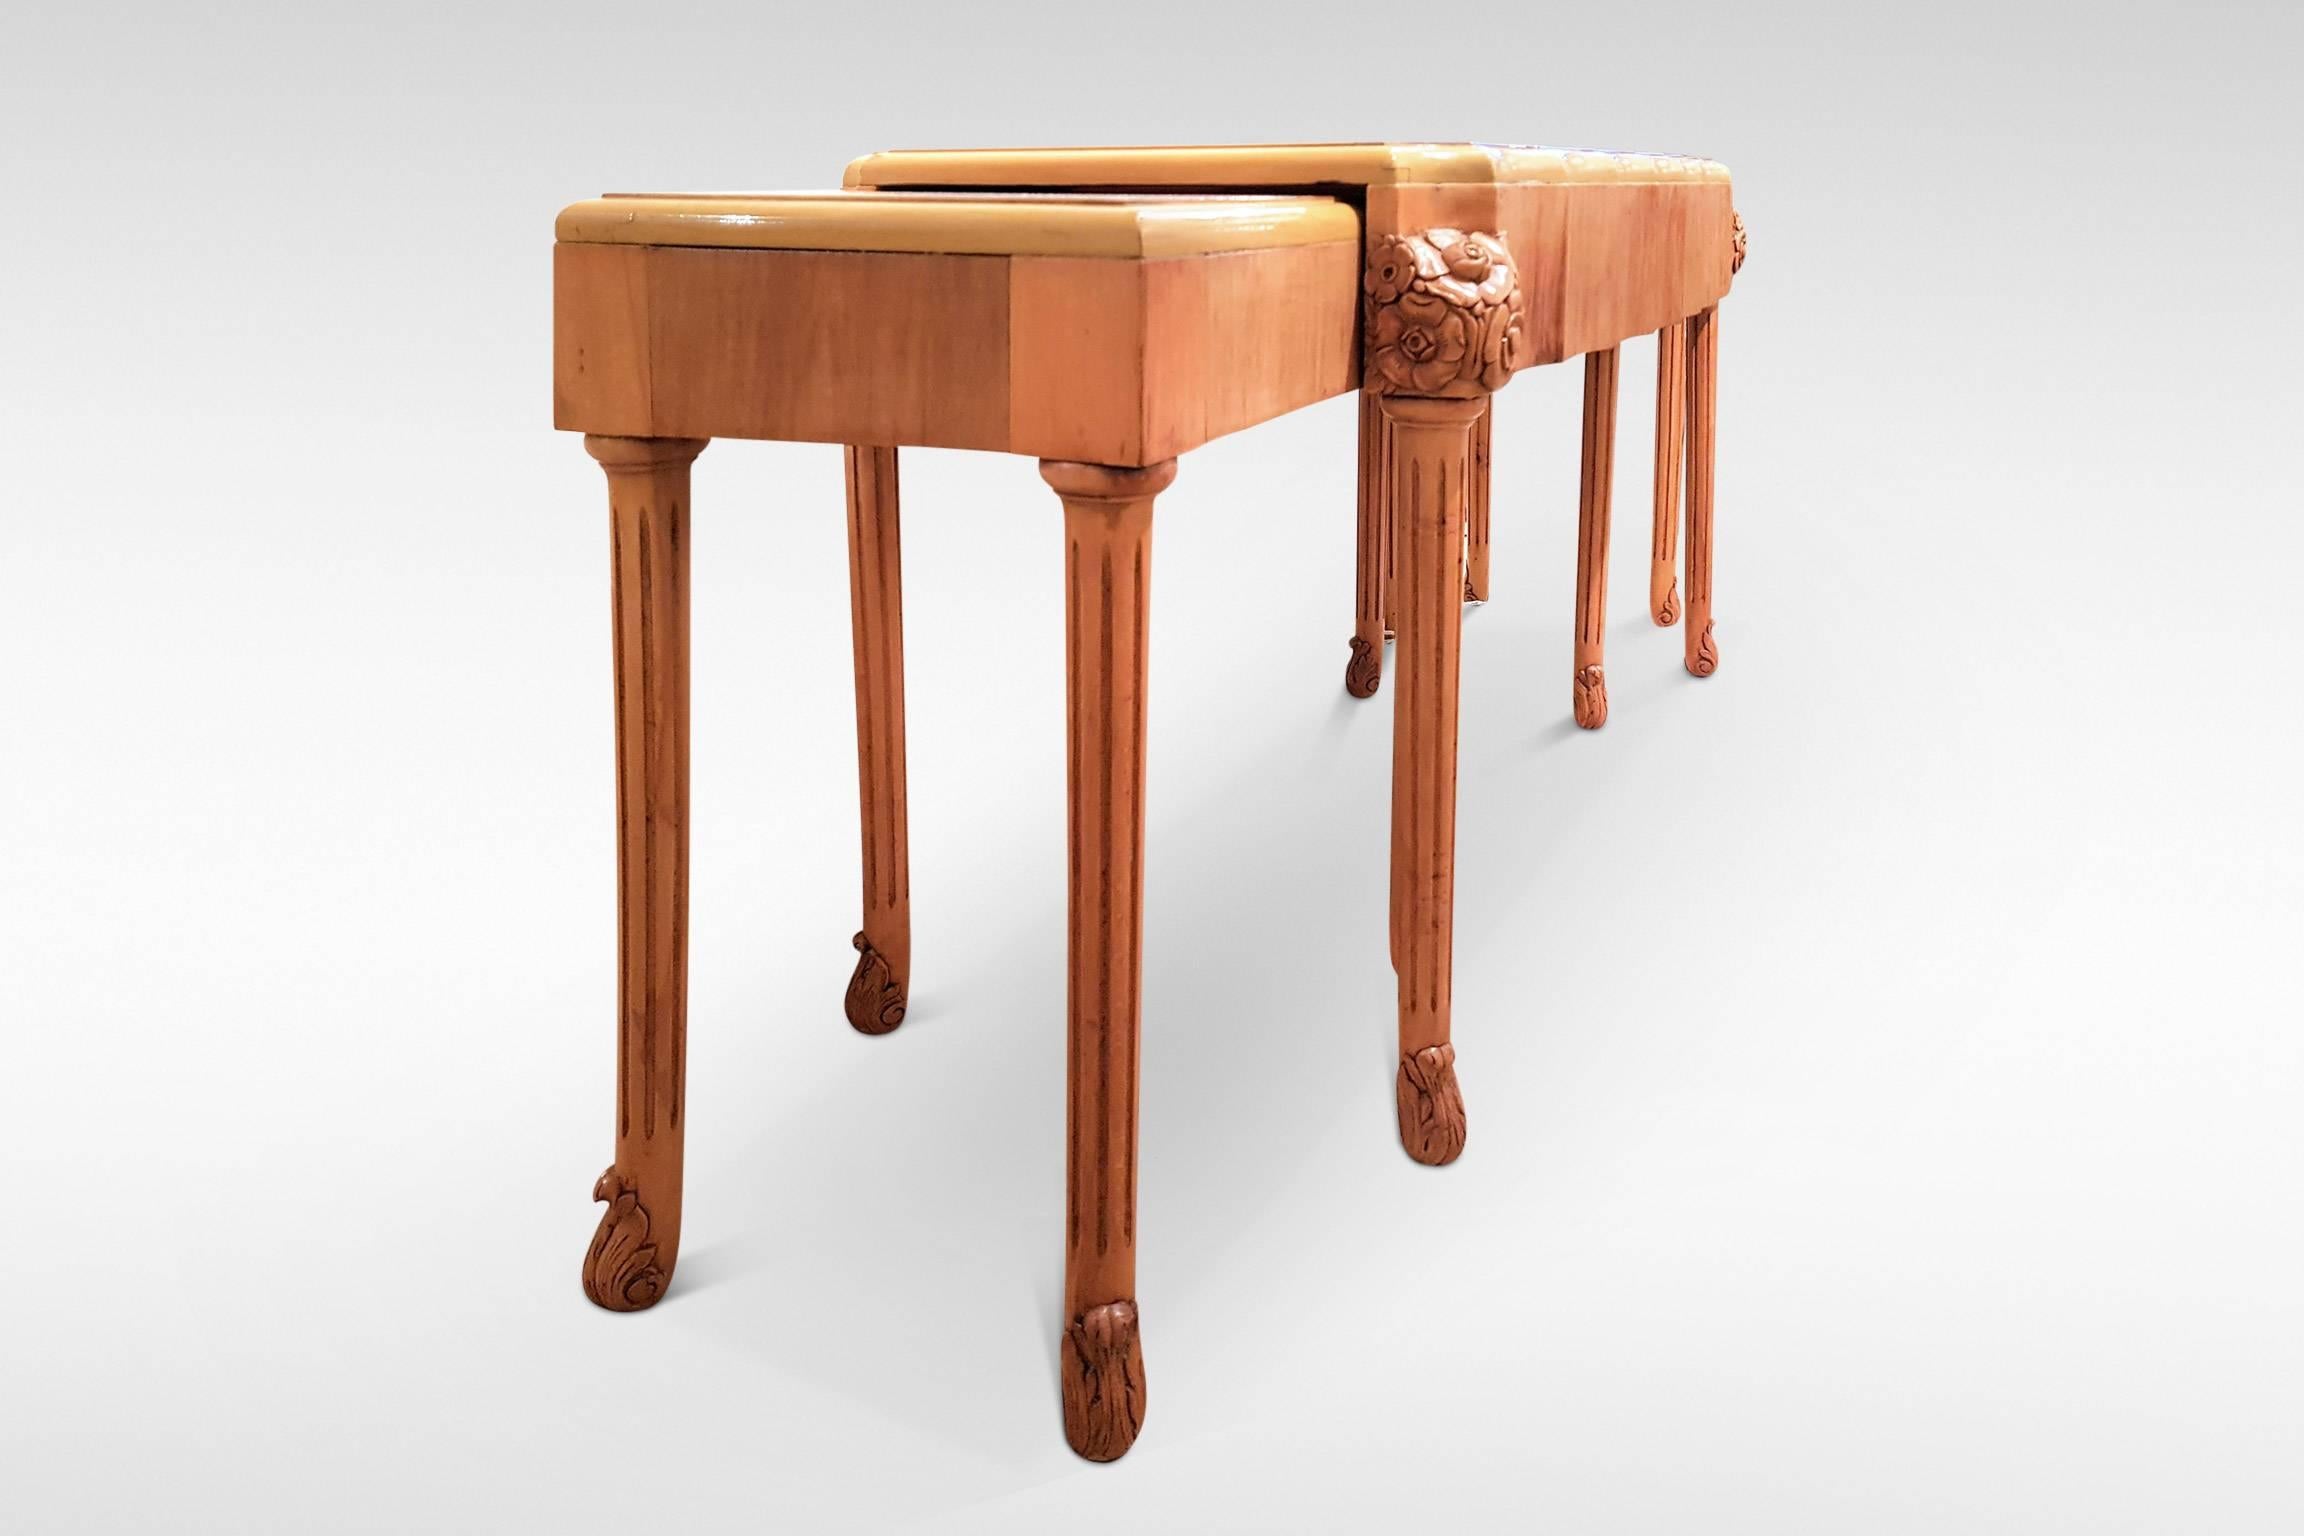 British Set of Art Deco Occasional Tables in Pale Walnut by Epstein